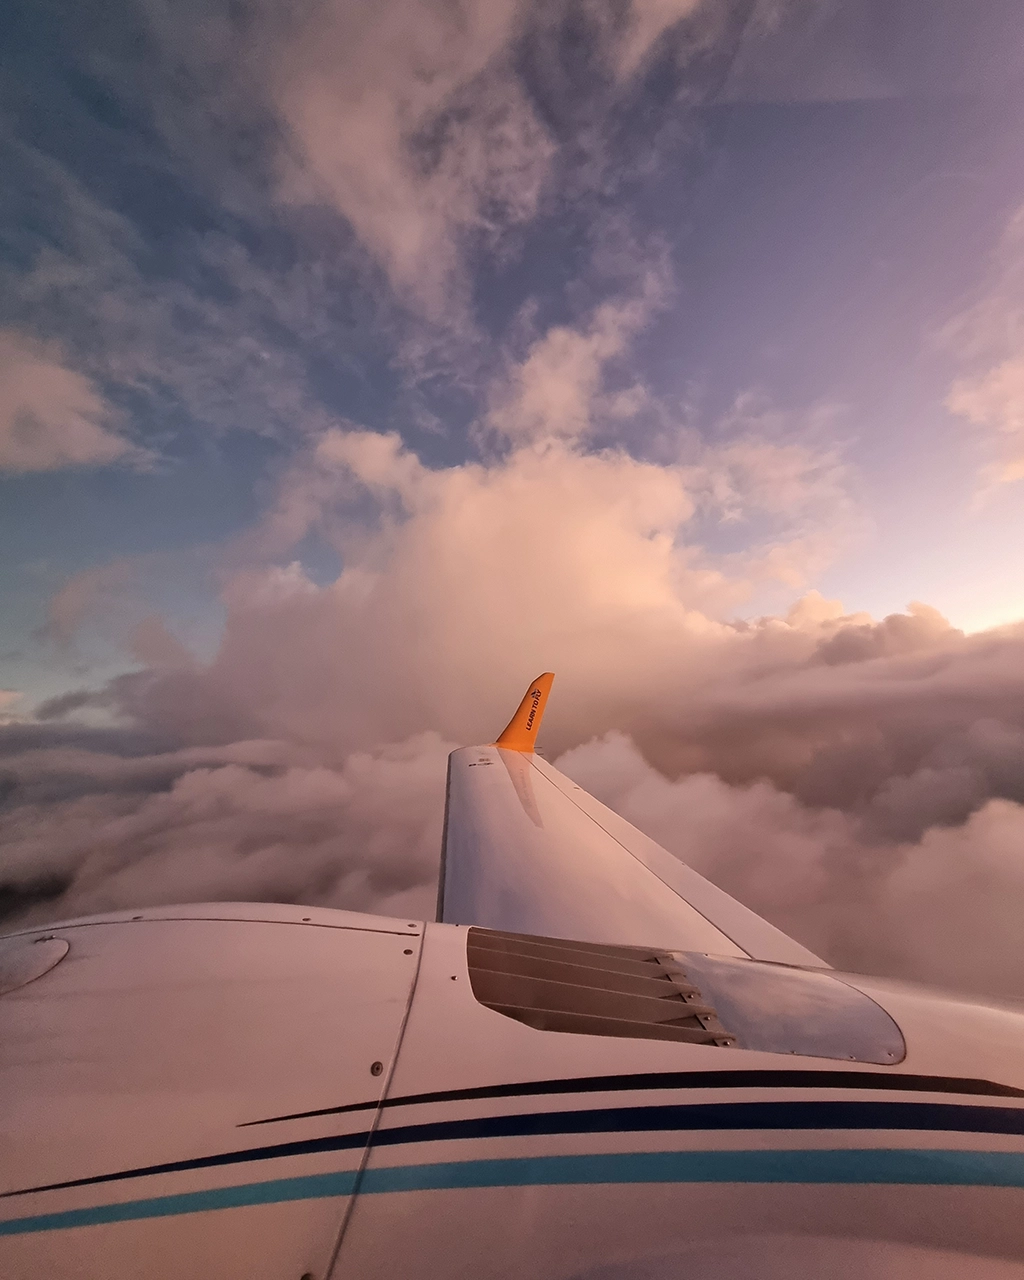 Instrument Flight Rules (IFR) versus Visual Flight Rules (VFR) – What is the Difference?